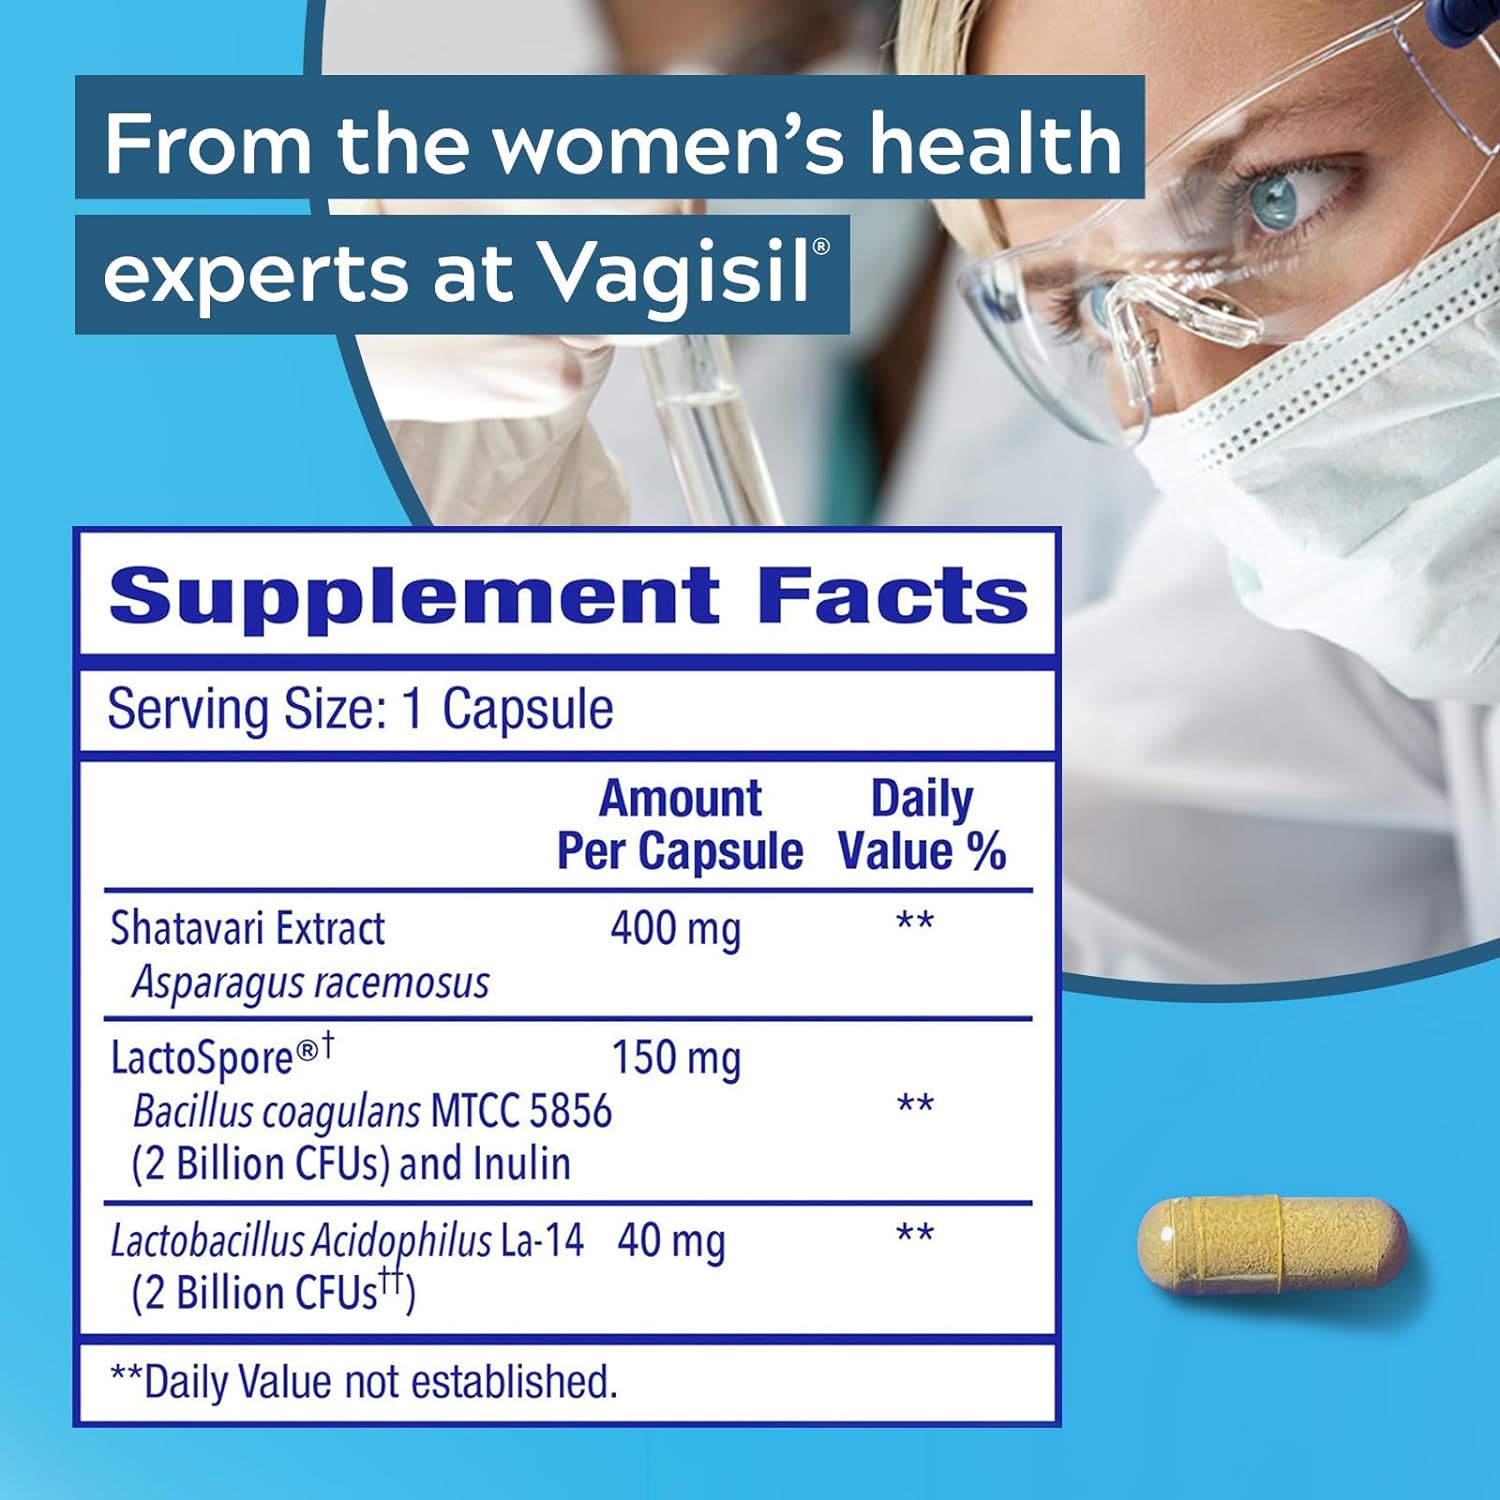 Vagisil Vaginal Health Supplements, Clinically-Proven Probiotics, Promotes Vaginal Health, Clean Ingredients, Helps Balance Vaginal pH, Just 1 Capsule Daily, 30 Capsules : Health & Household